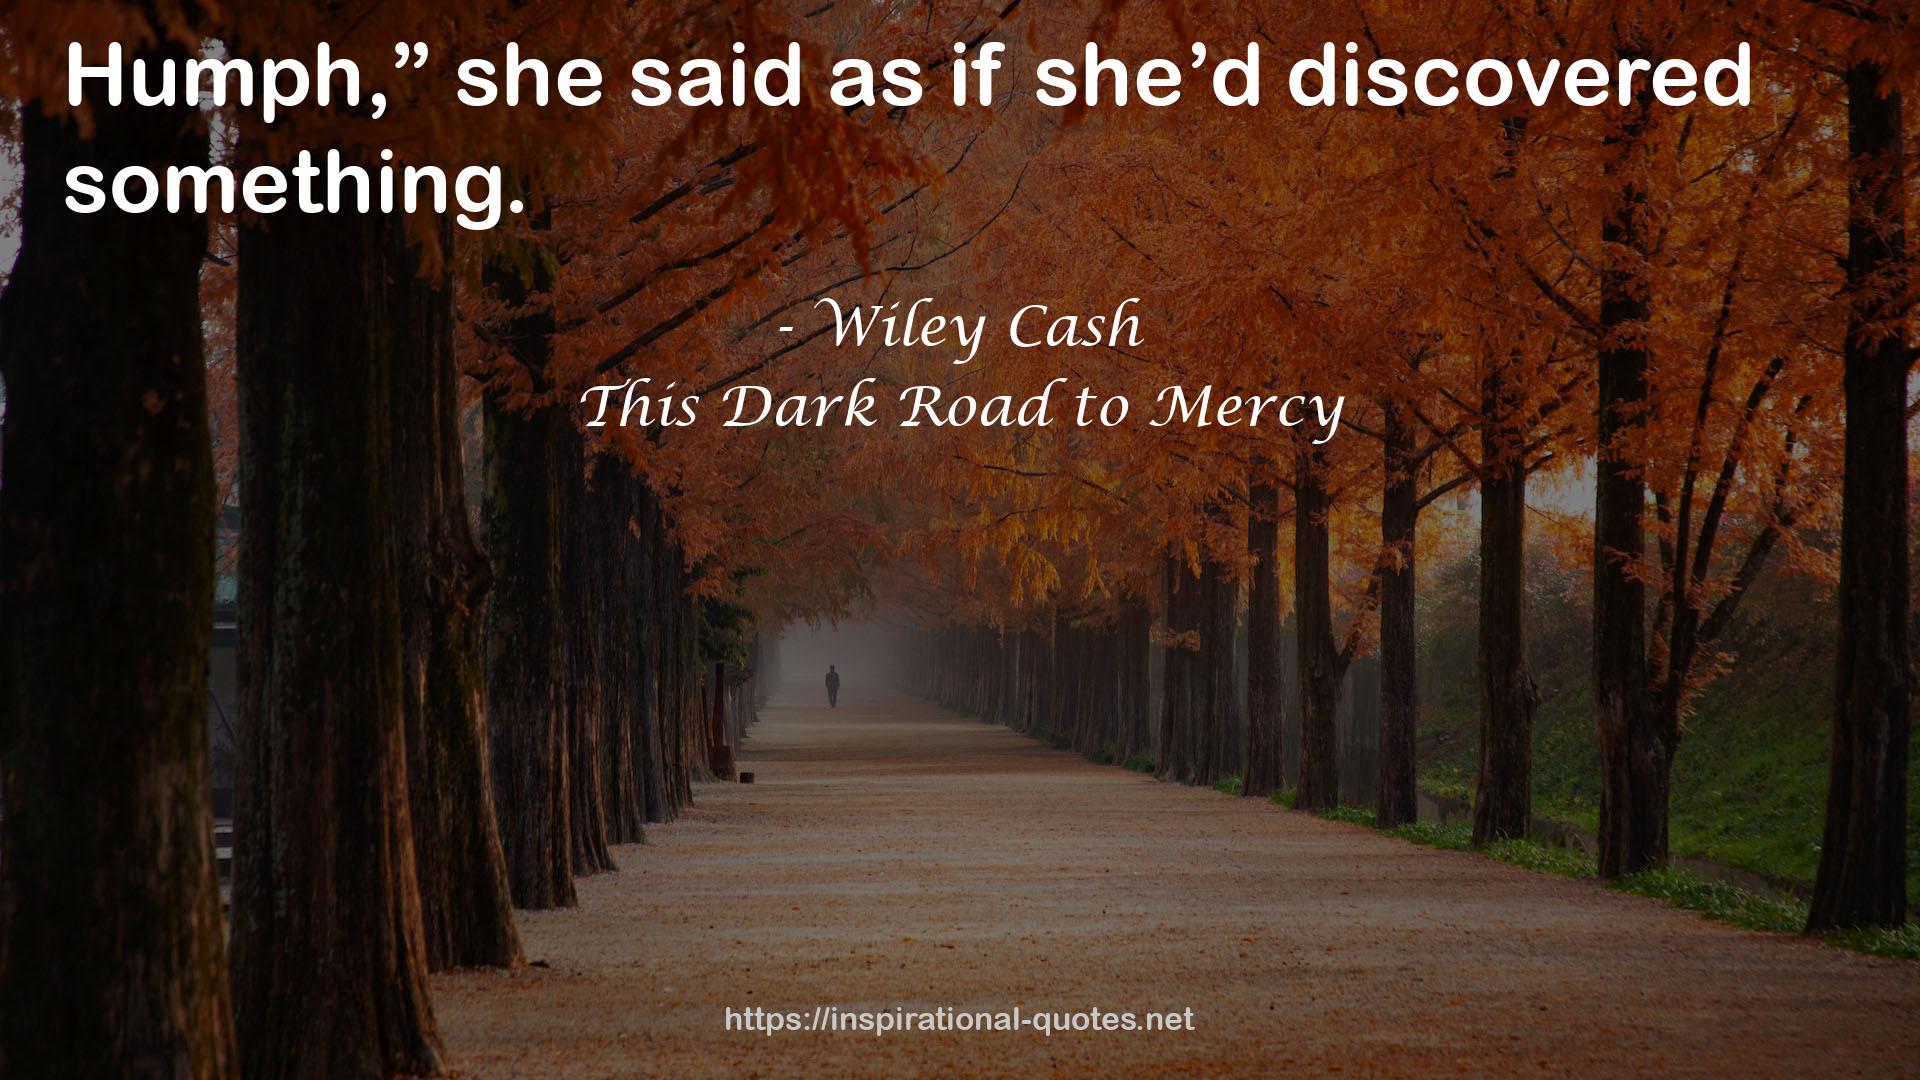 This Dark Road to Mercy QUOTES